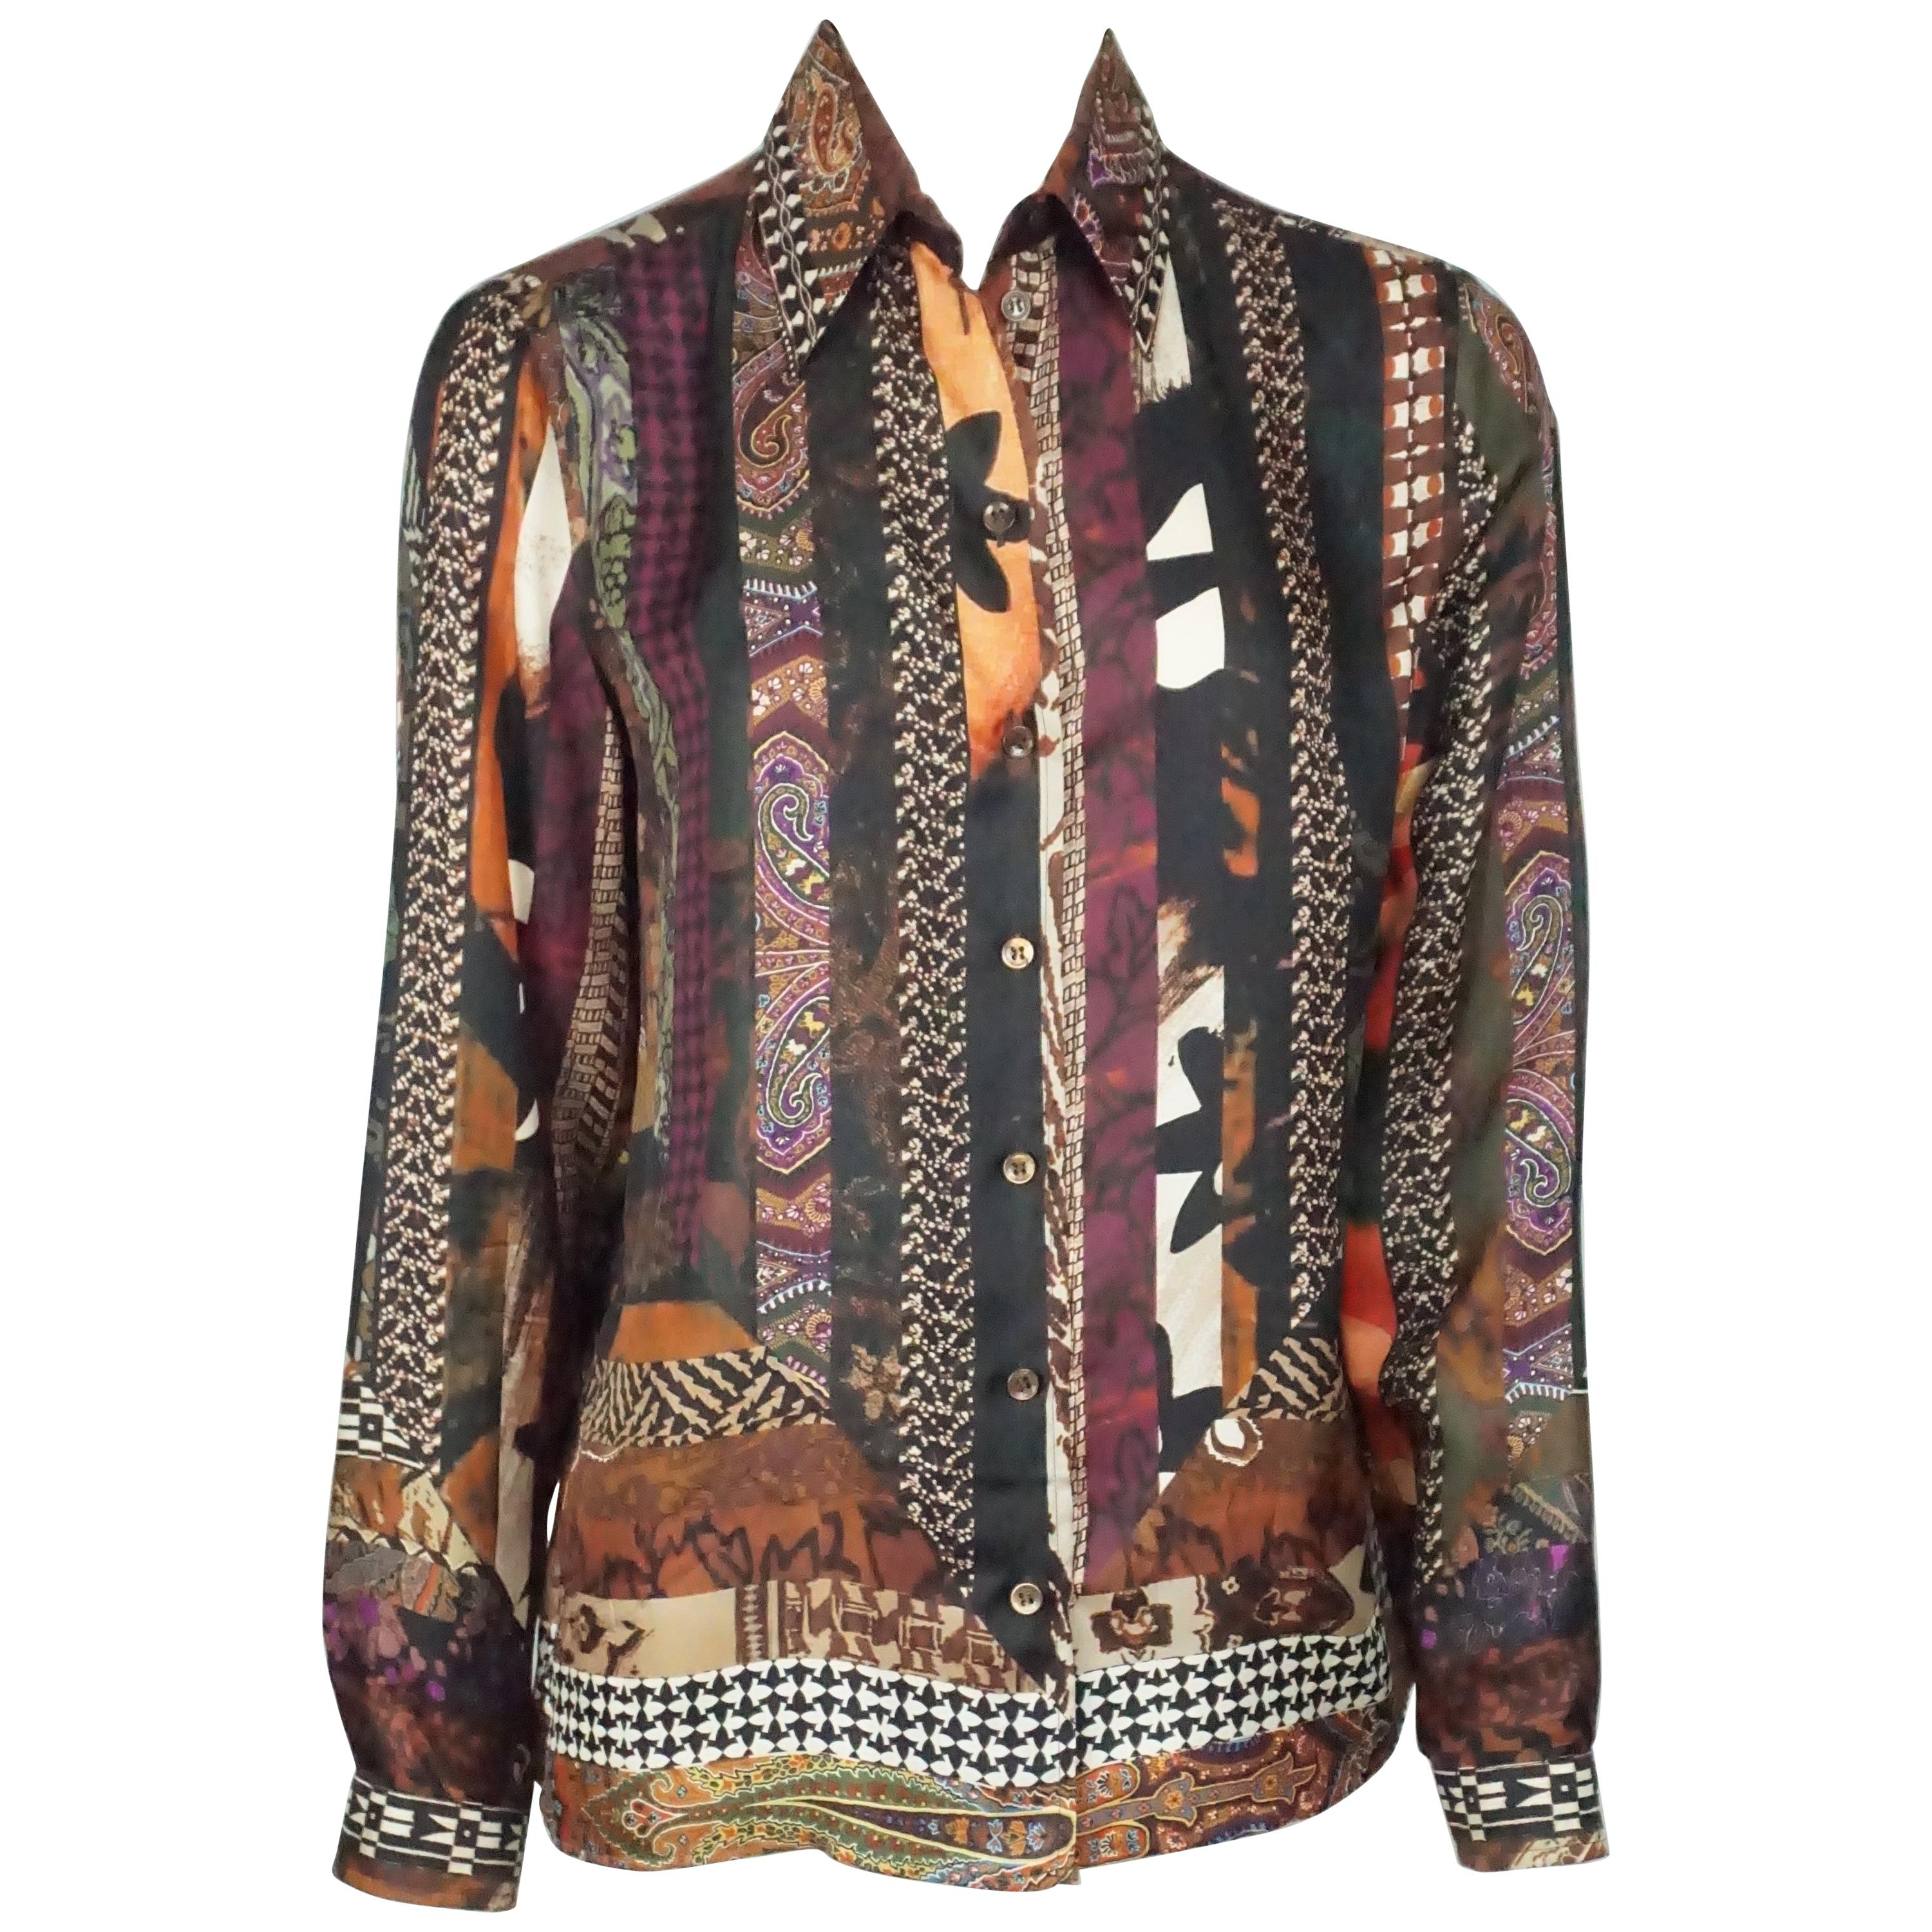 Etro Multi Print Long sleeve Top with Buttons - 44 